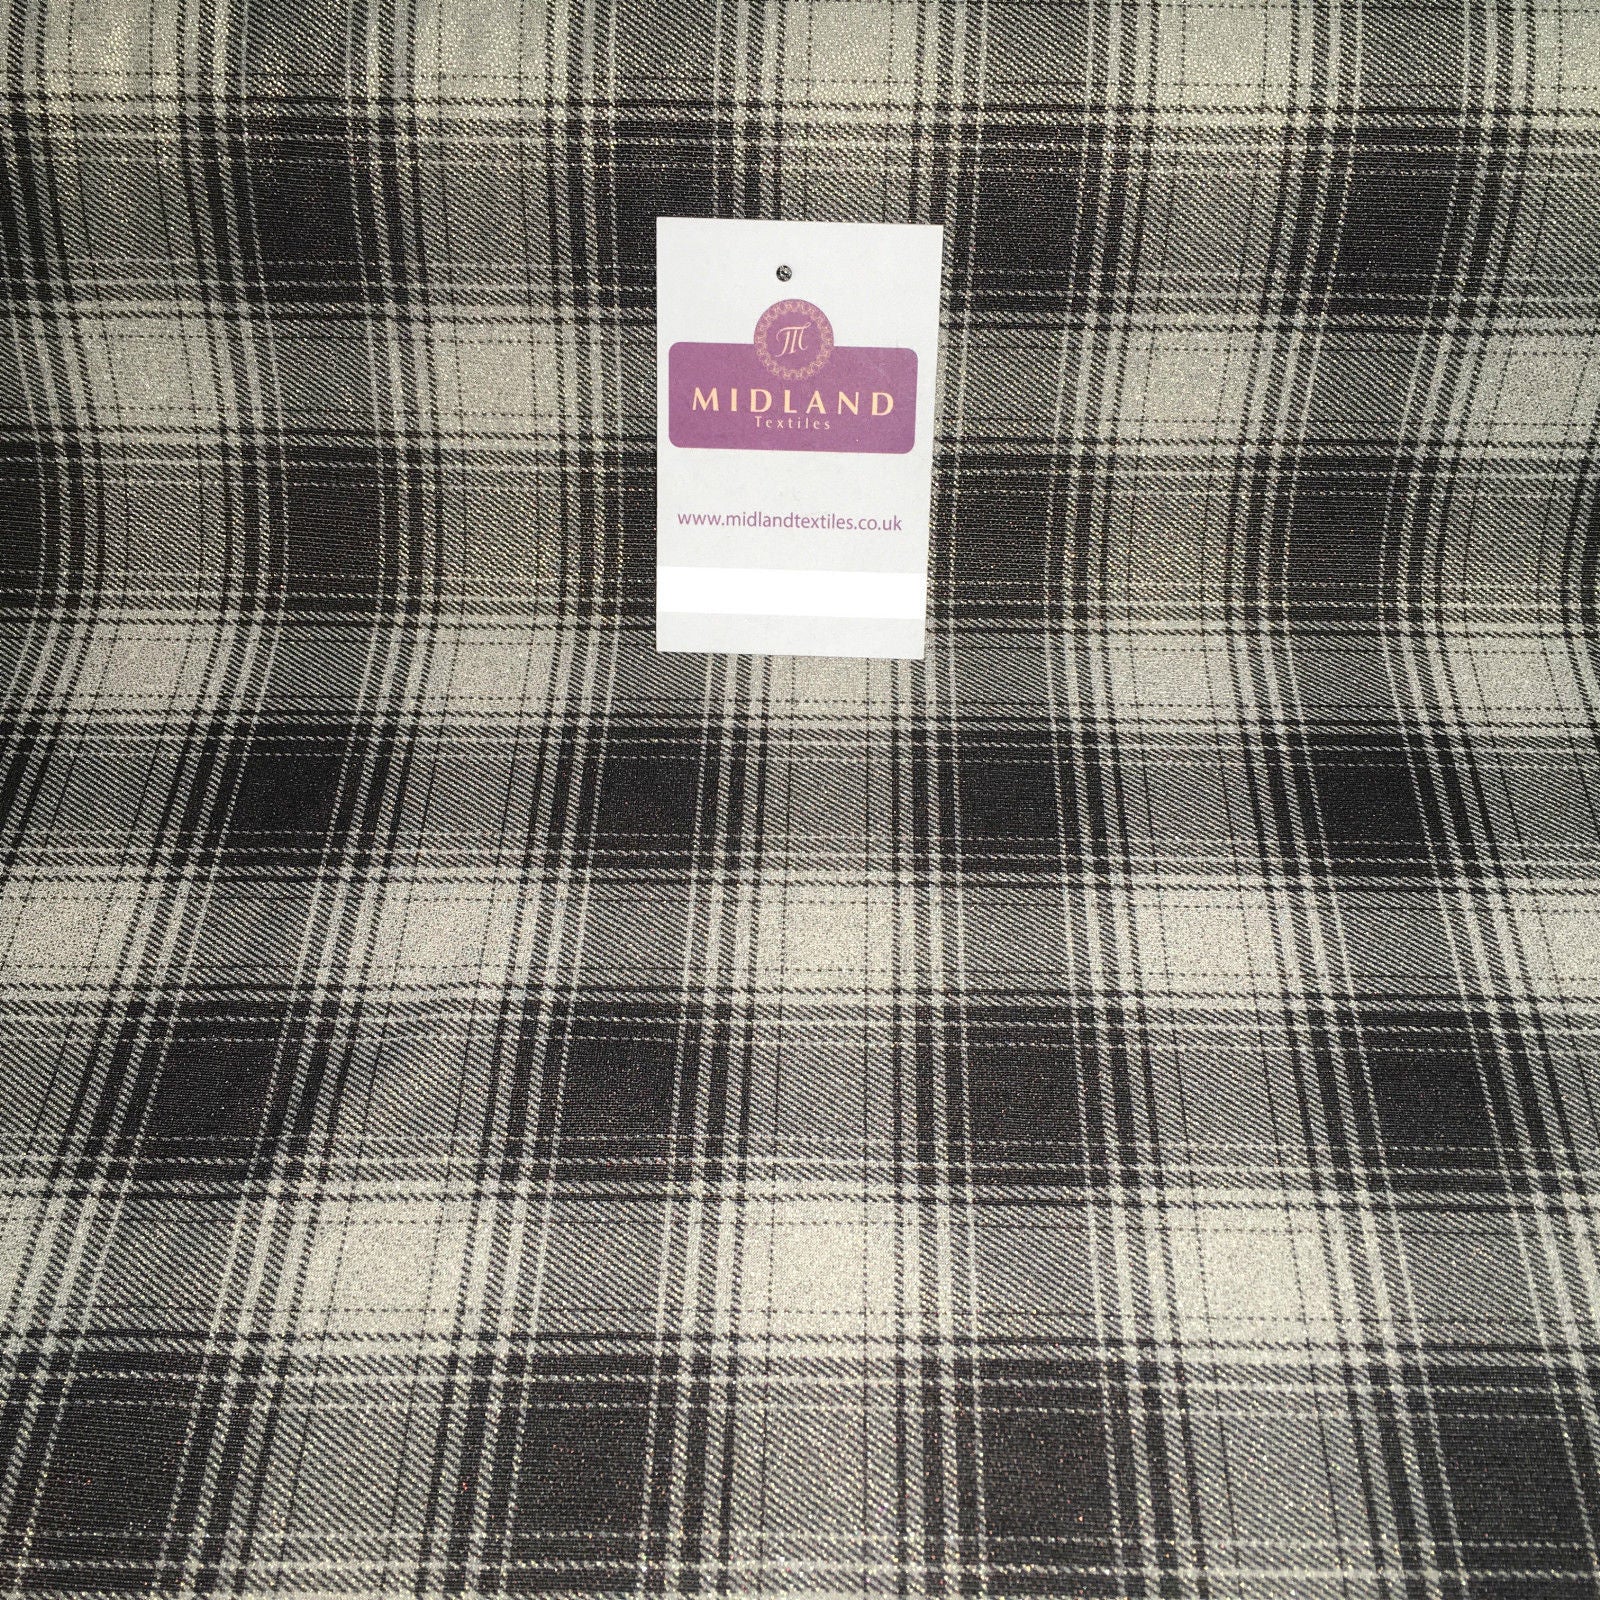 Shimmer Checkered Printed ITY Dress,  Fabric  58" wide M729 Mtex - Midland Textiles & Fabric